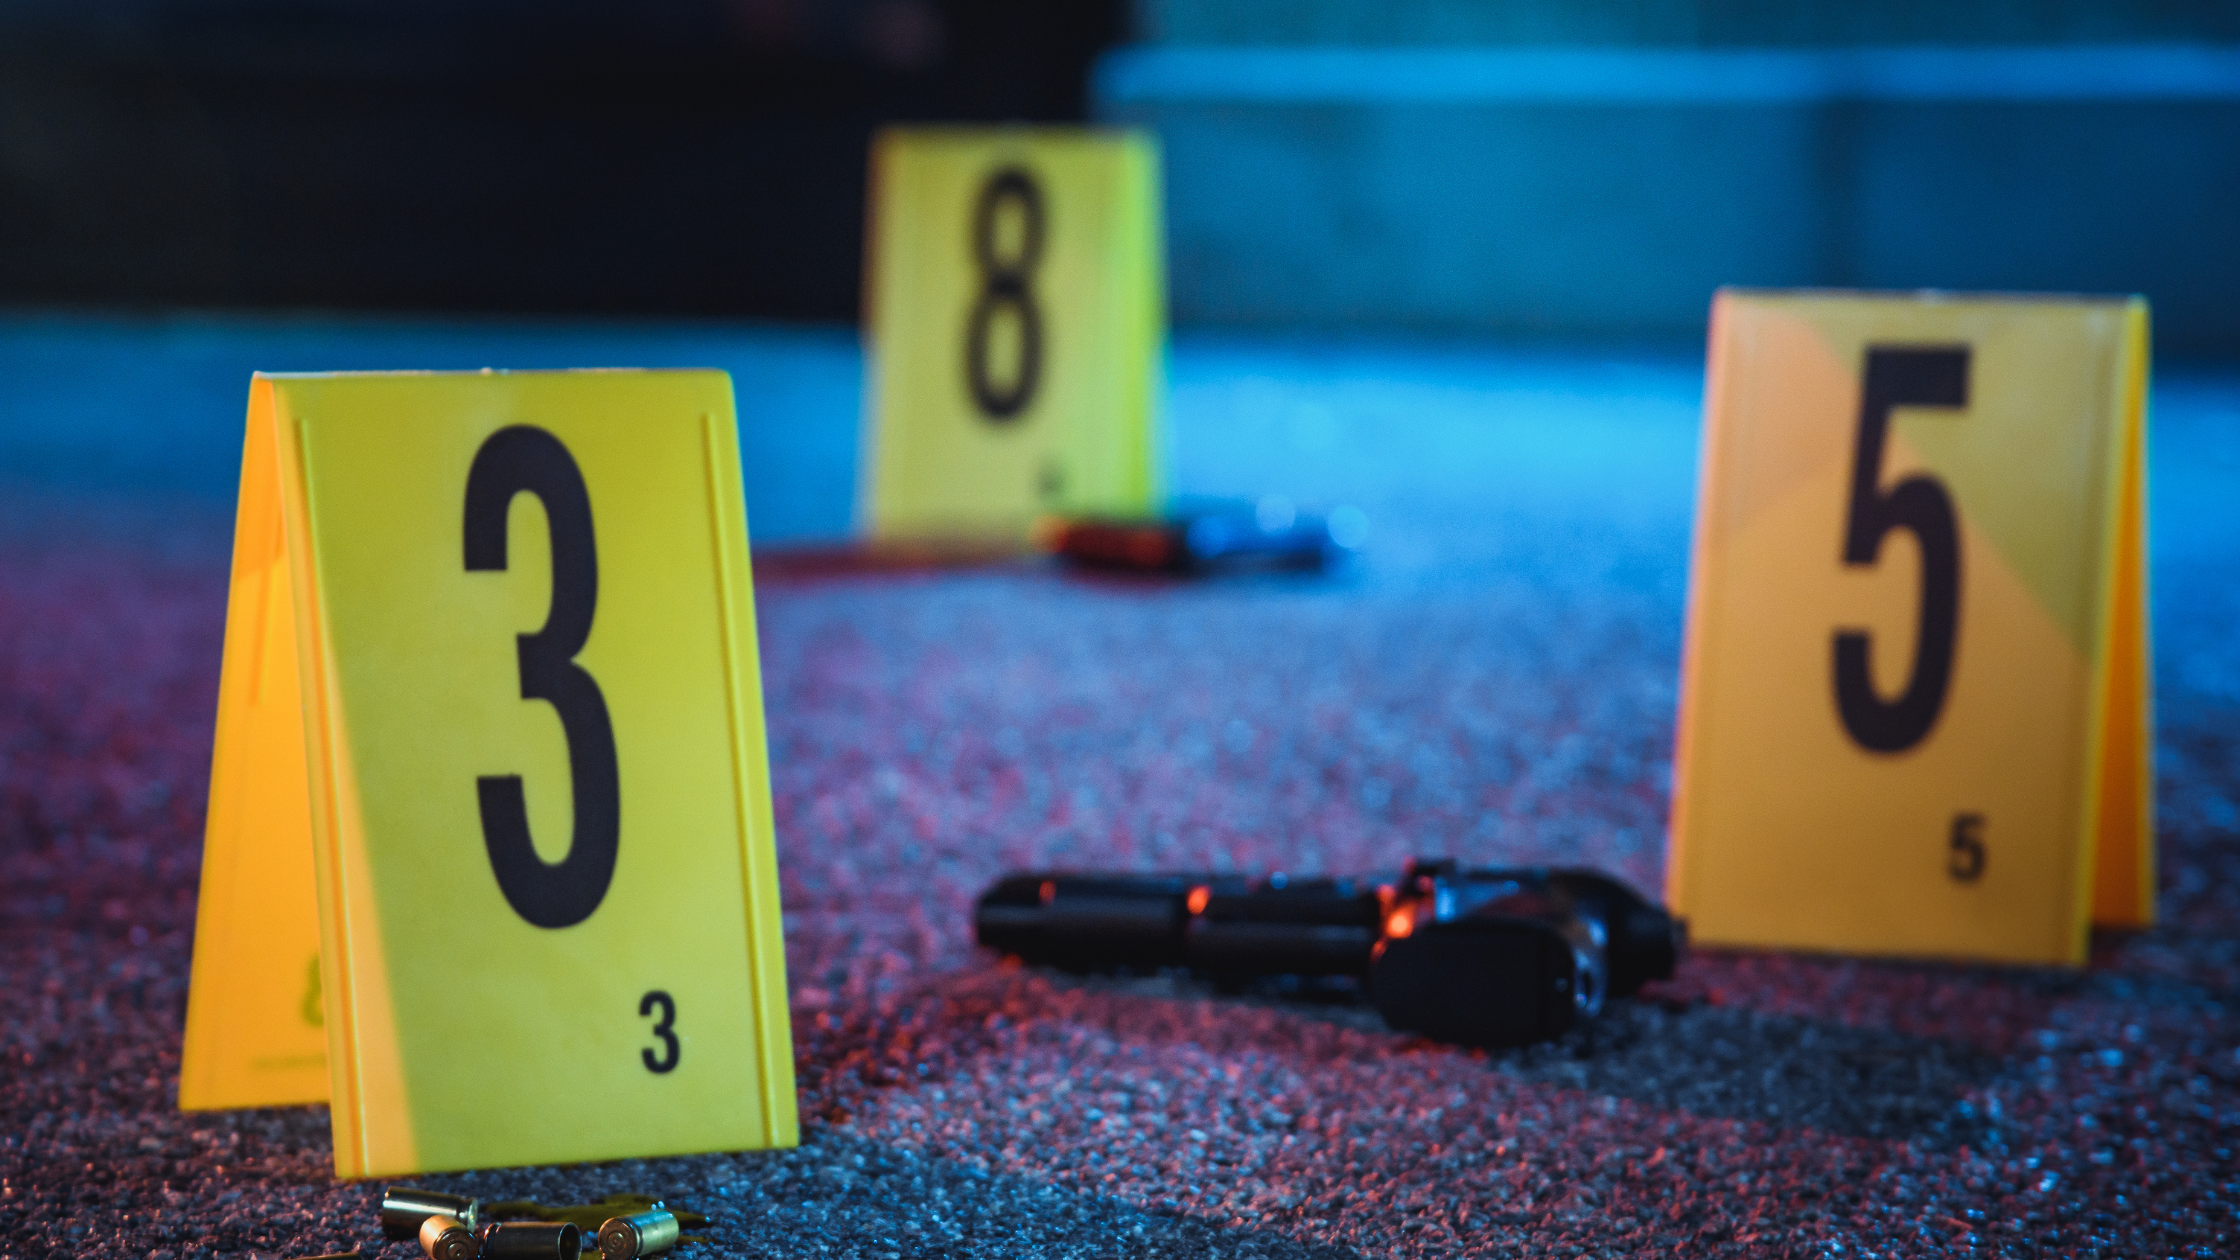 Crime scene numbers next to a pile of bullet casings, a glock, and another weapon.